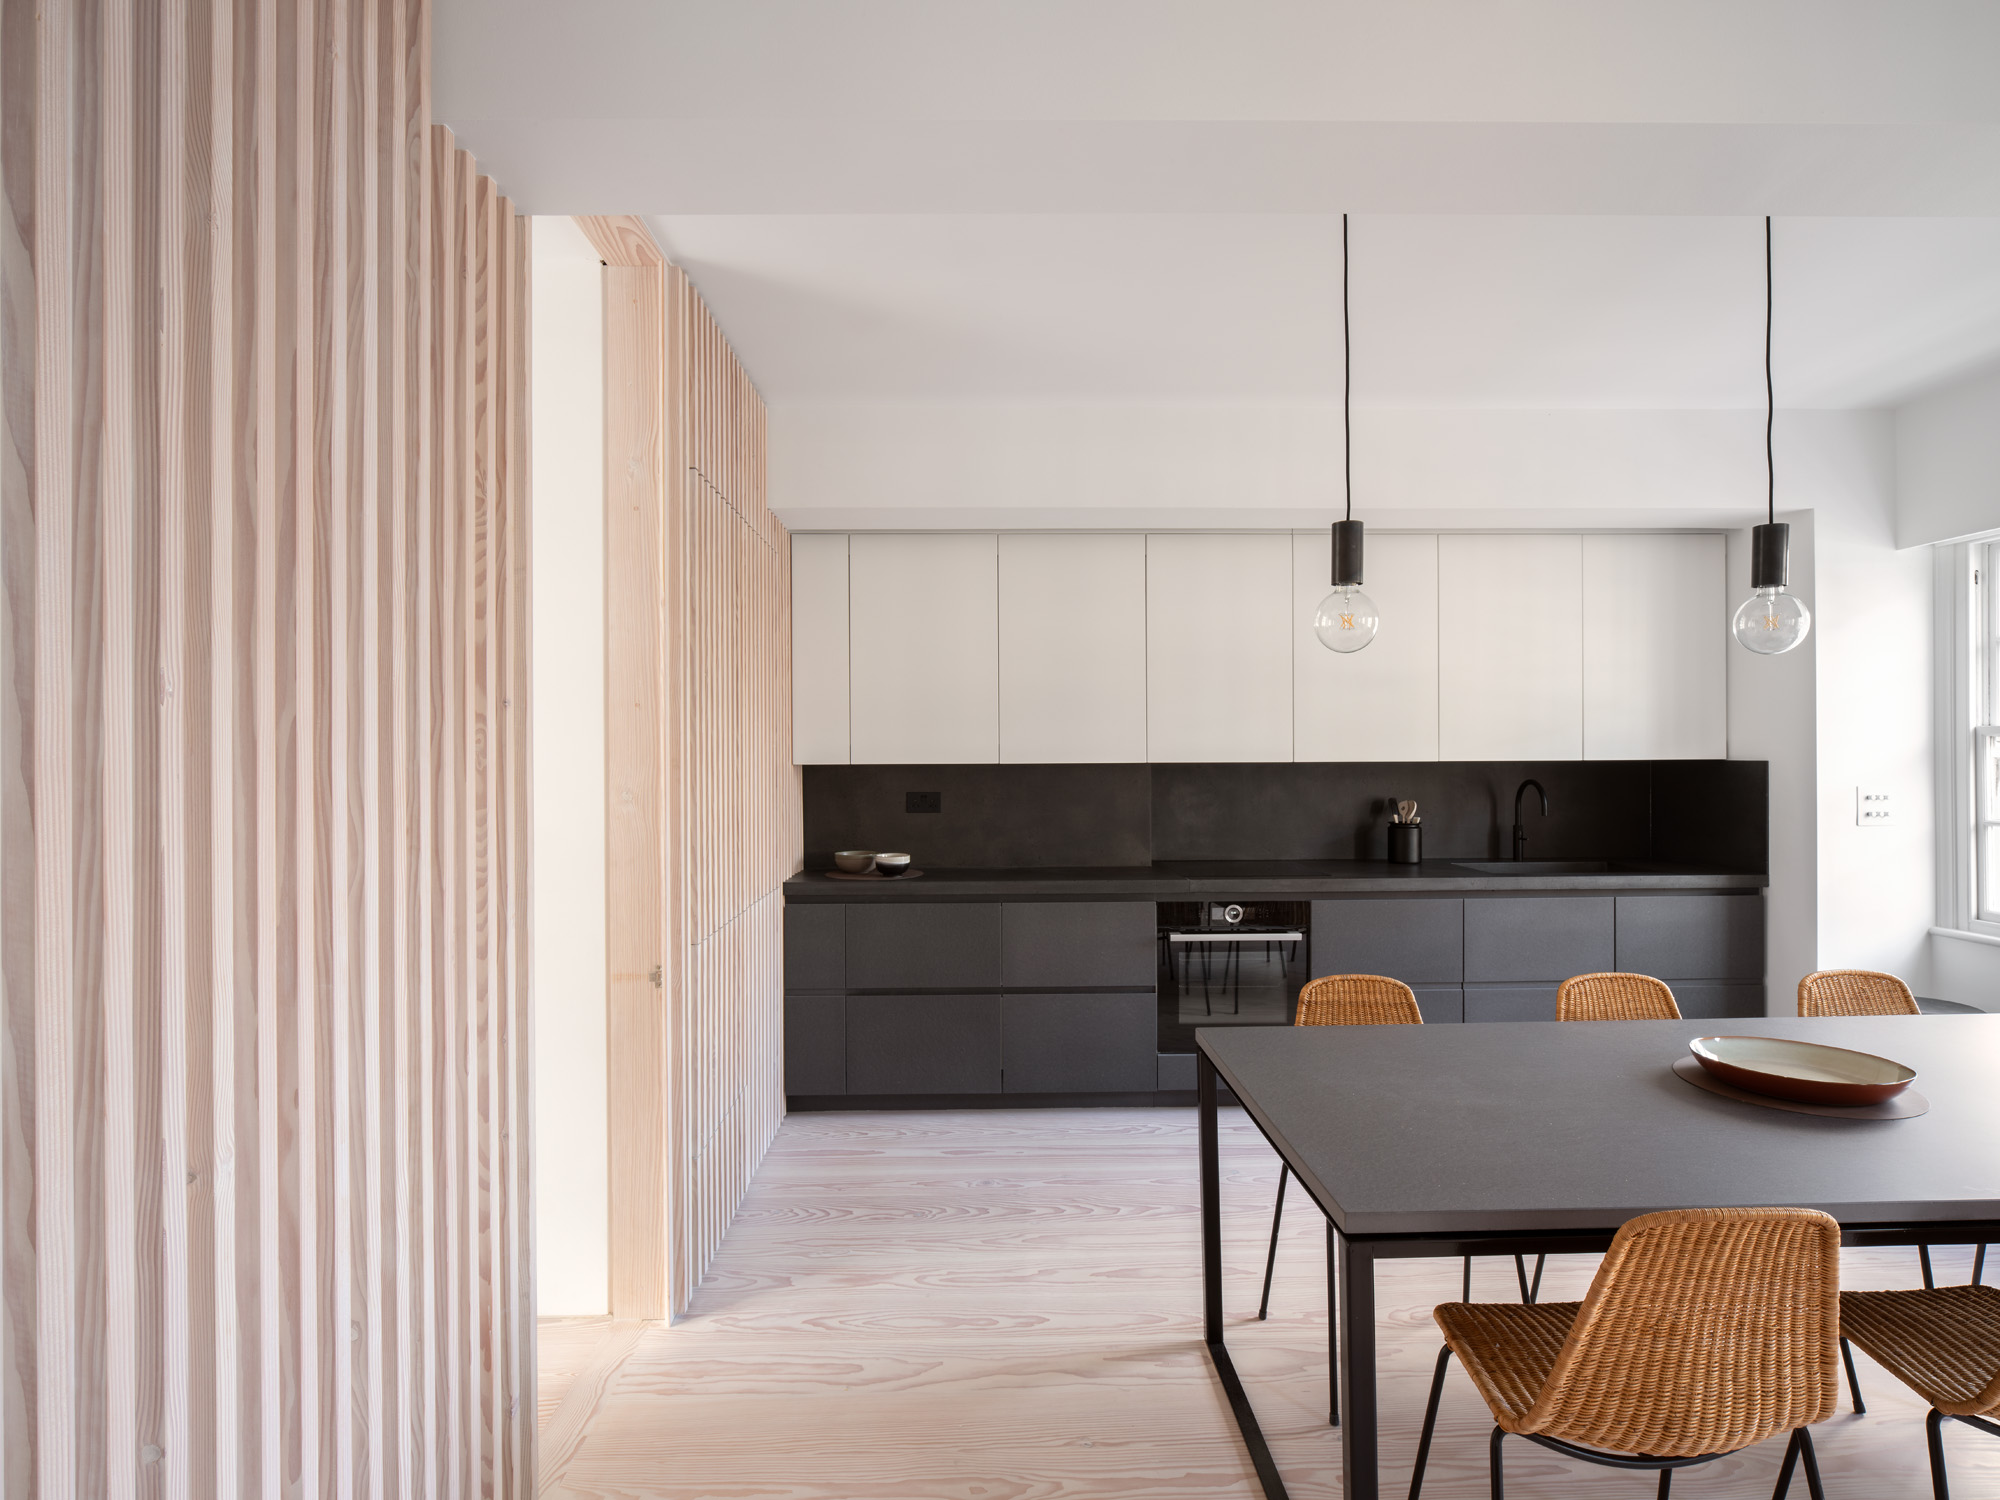 Kitchen by Proctor &amp; Shaw - minimalist contemporary architecture and interior design in London